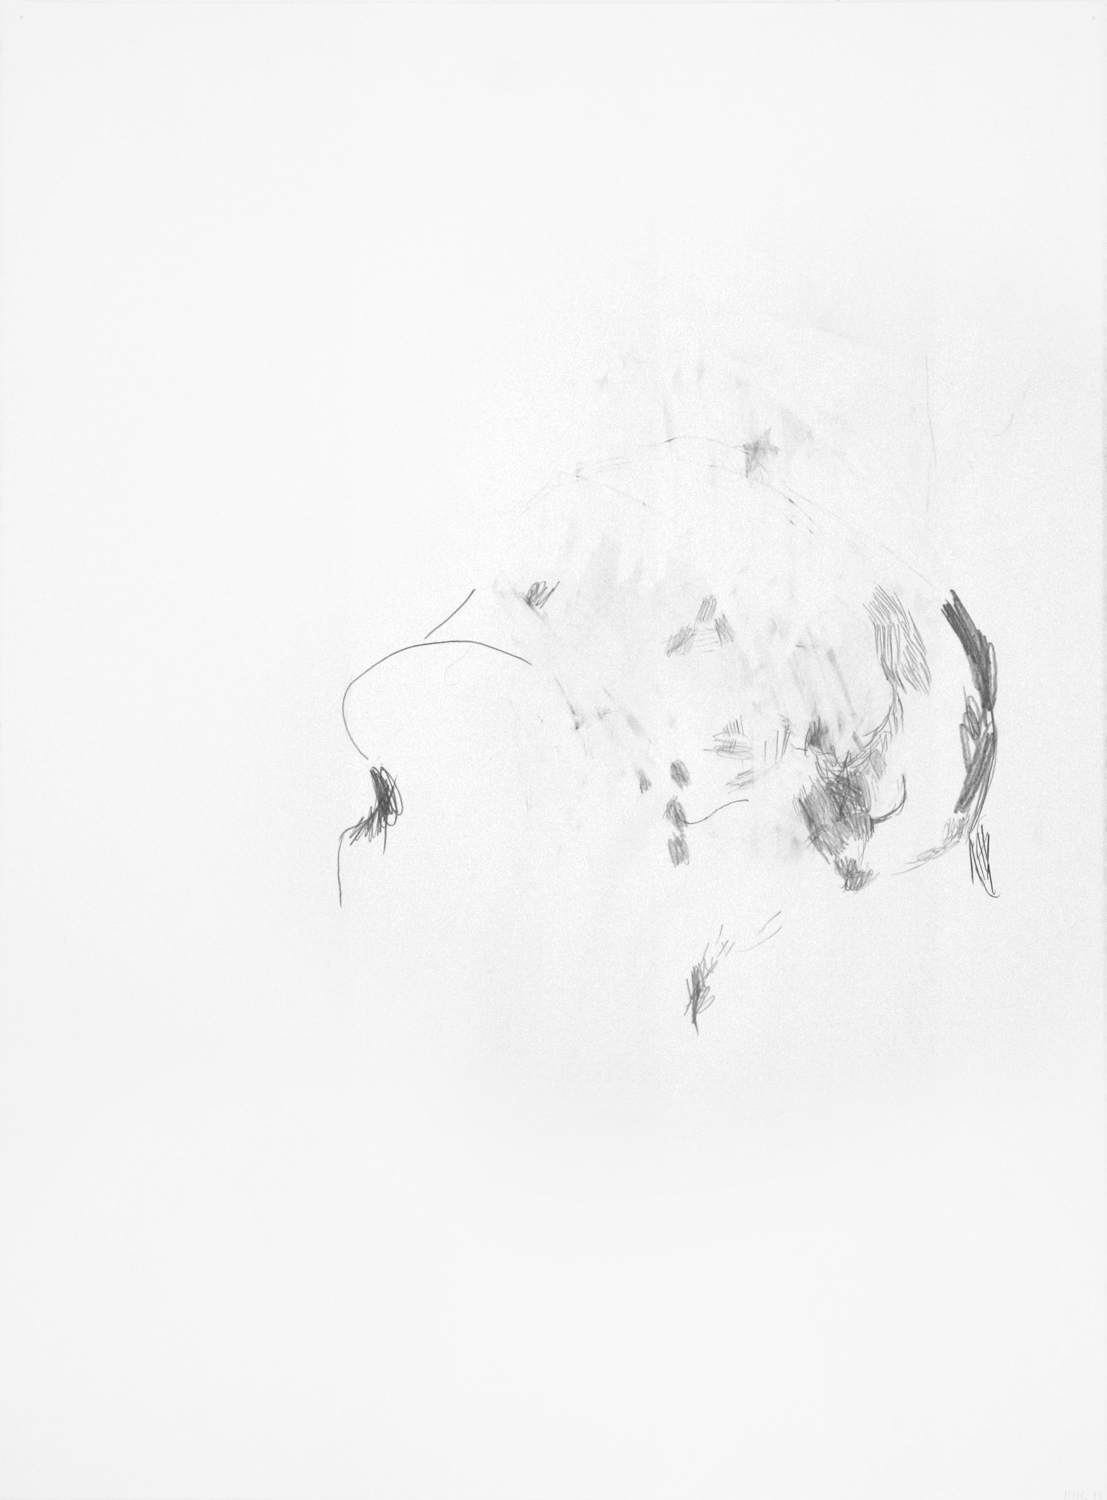  Untitled, 2012. 30” x 22”, pencil on paper. 